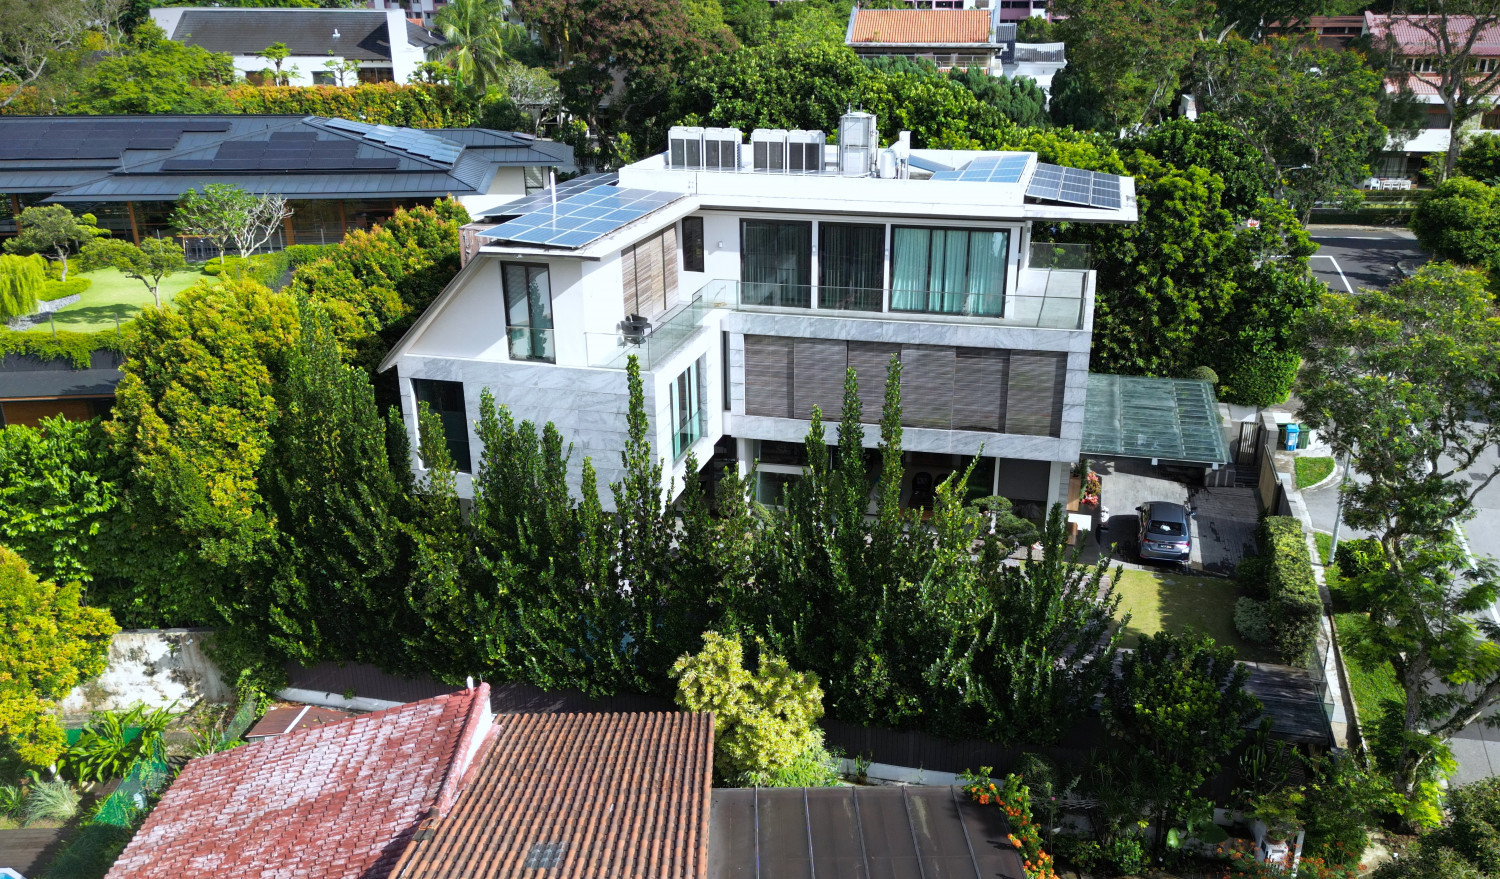 Bungalow on Woollerton Drive on the market for $30.33 mil - Property News